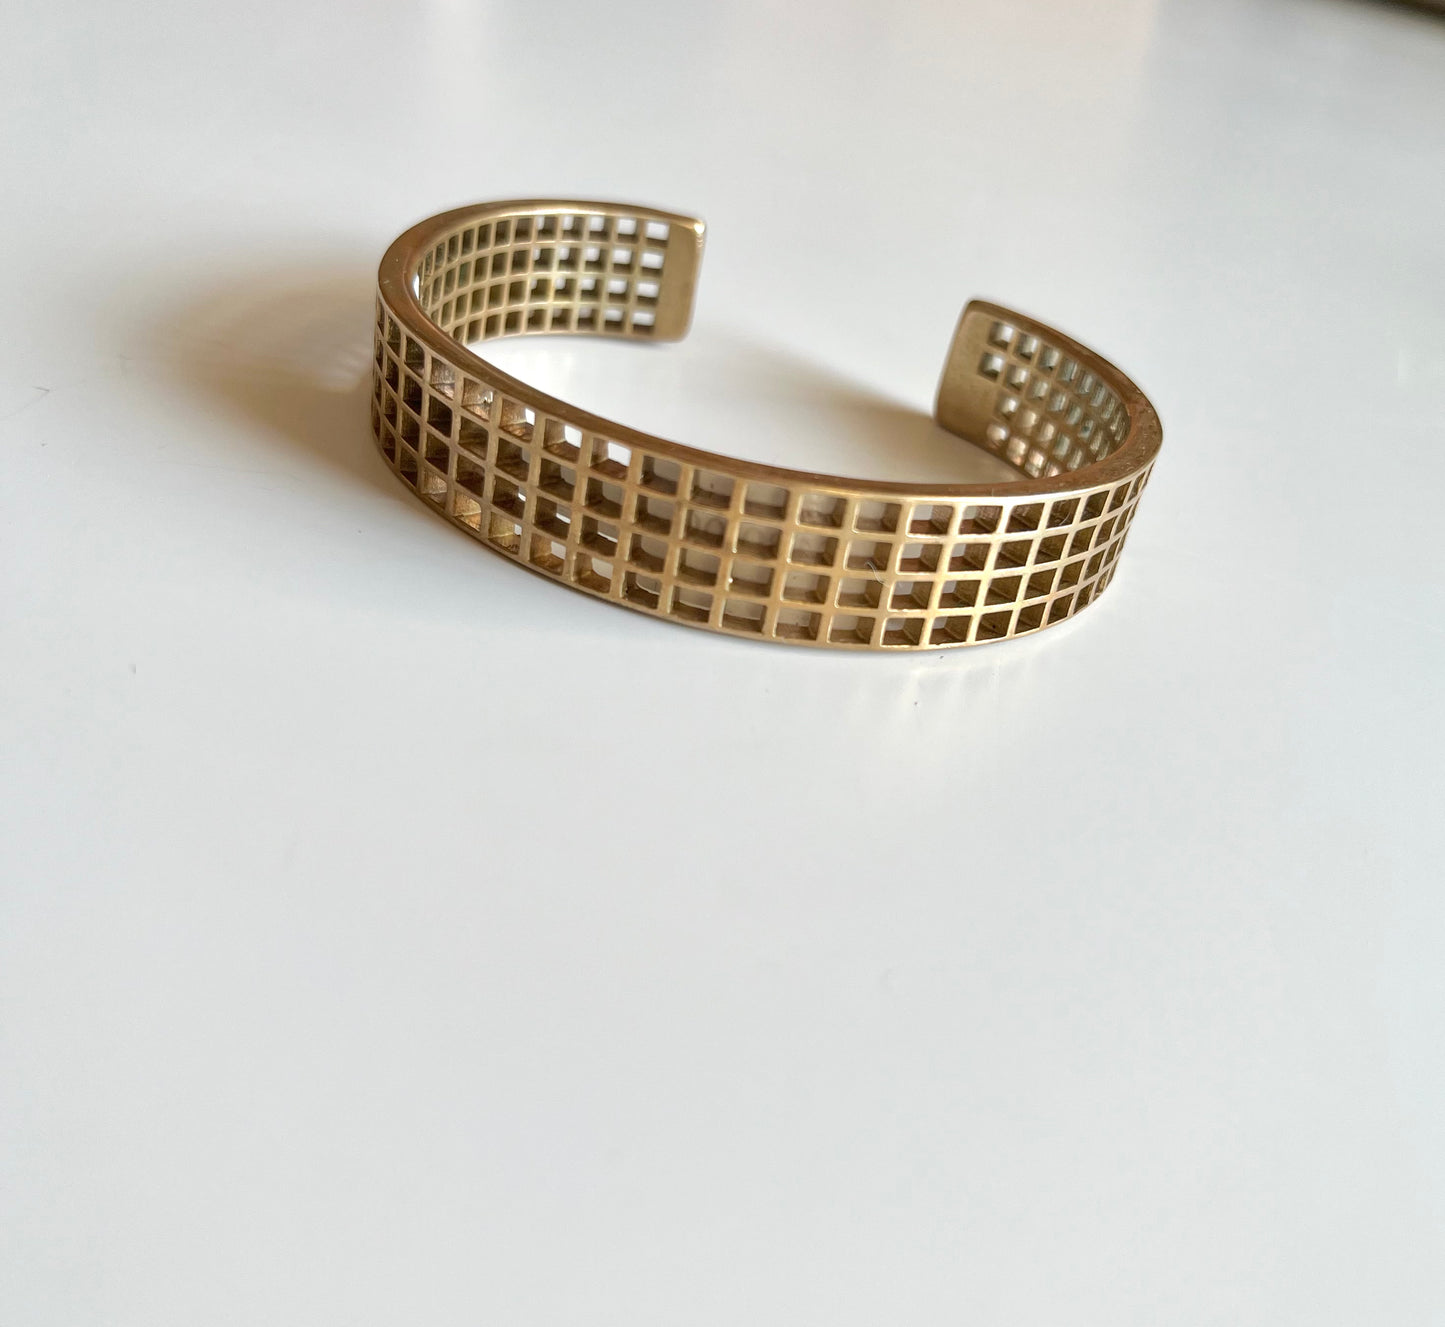 Mimosa Handcrafted 4-Row Grid Cuff Bracelet